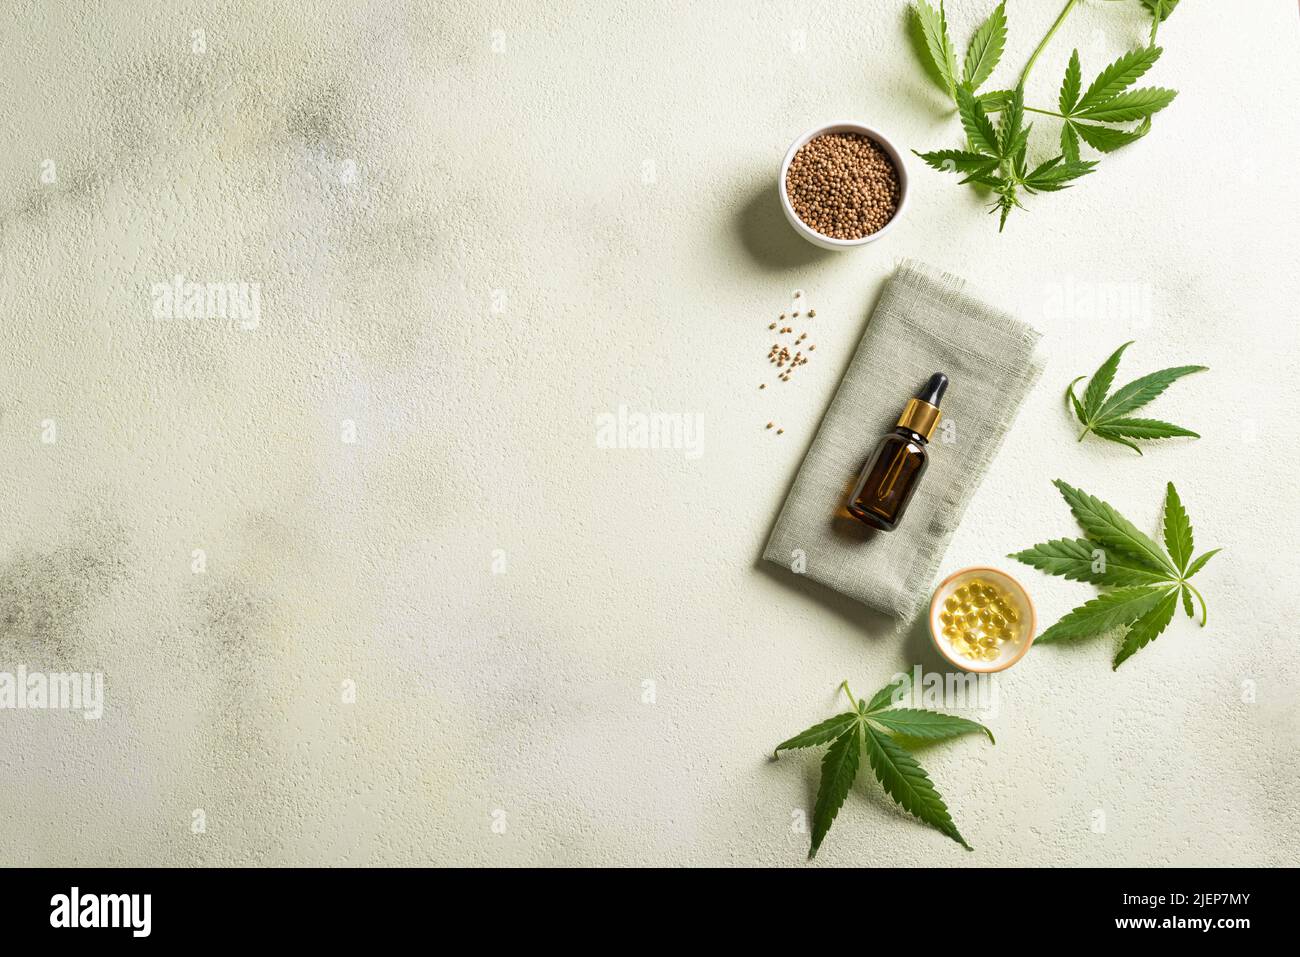 Hemp oil, leaves and seeds, cbd oil in bottle and capsules, alternative medicine and organic skin care concept. Copy space. Stock Photo